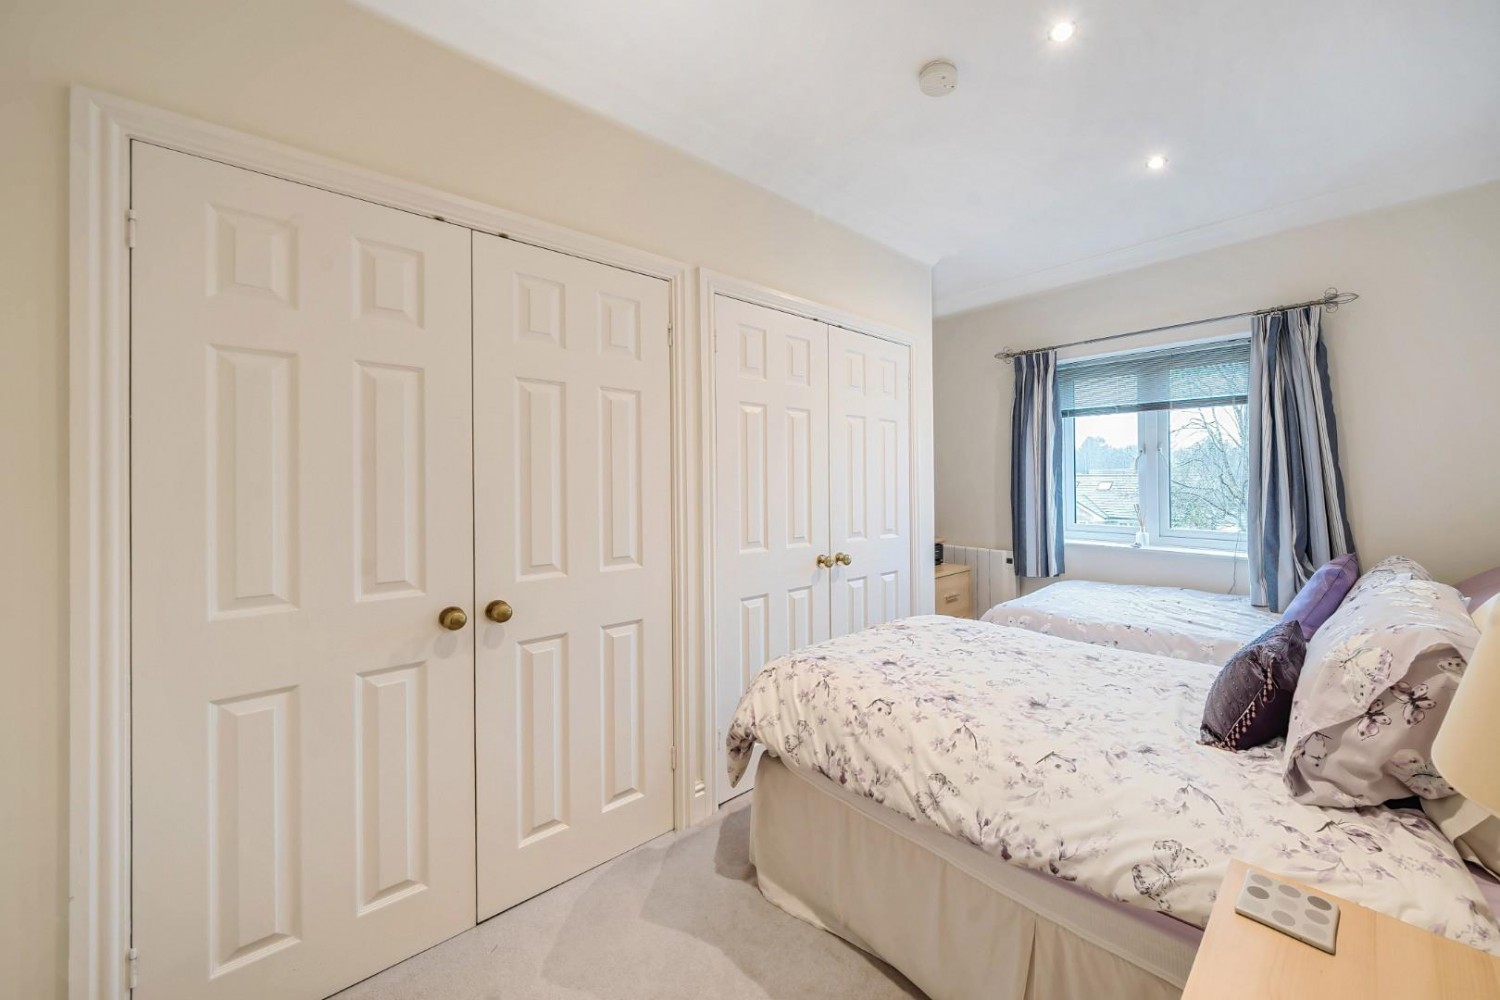 Smithy Court, Collingham, Wetherby